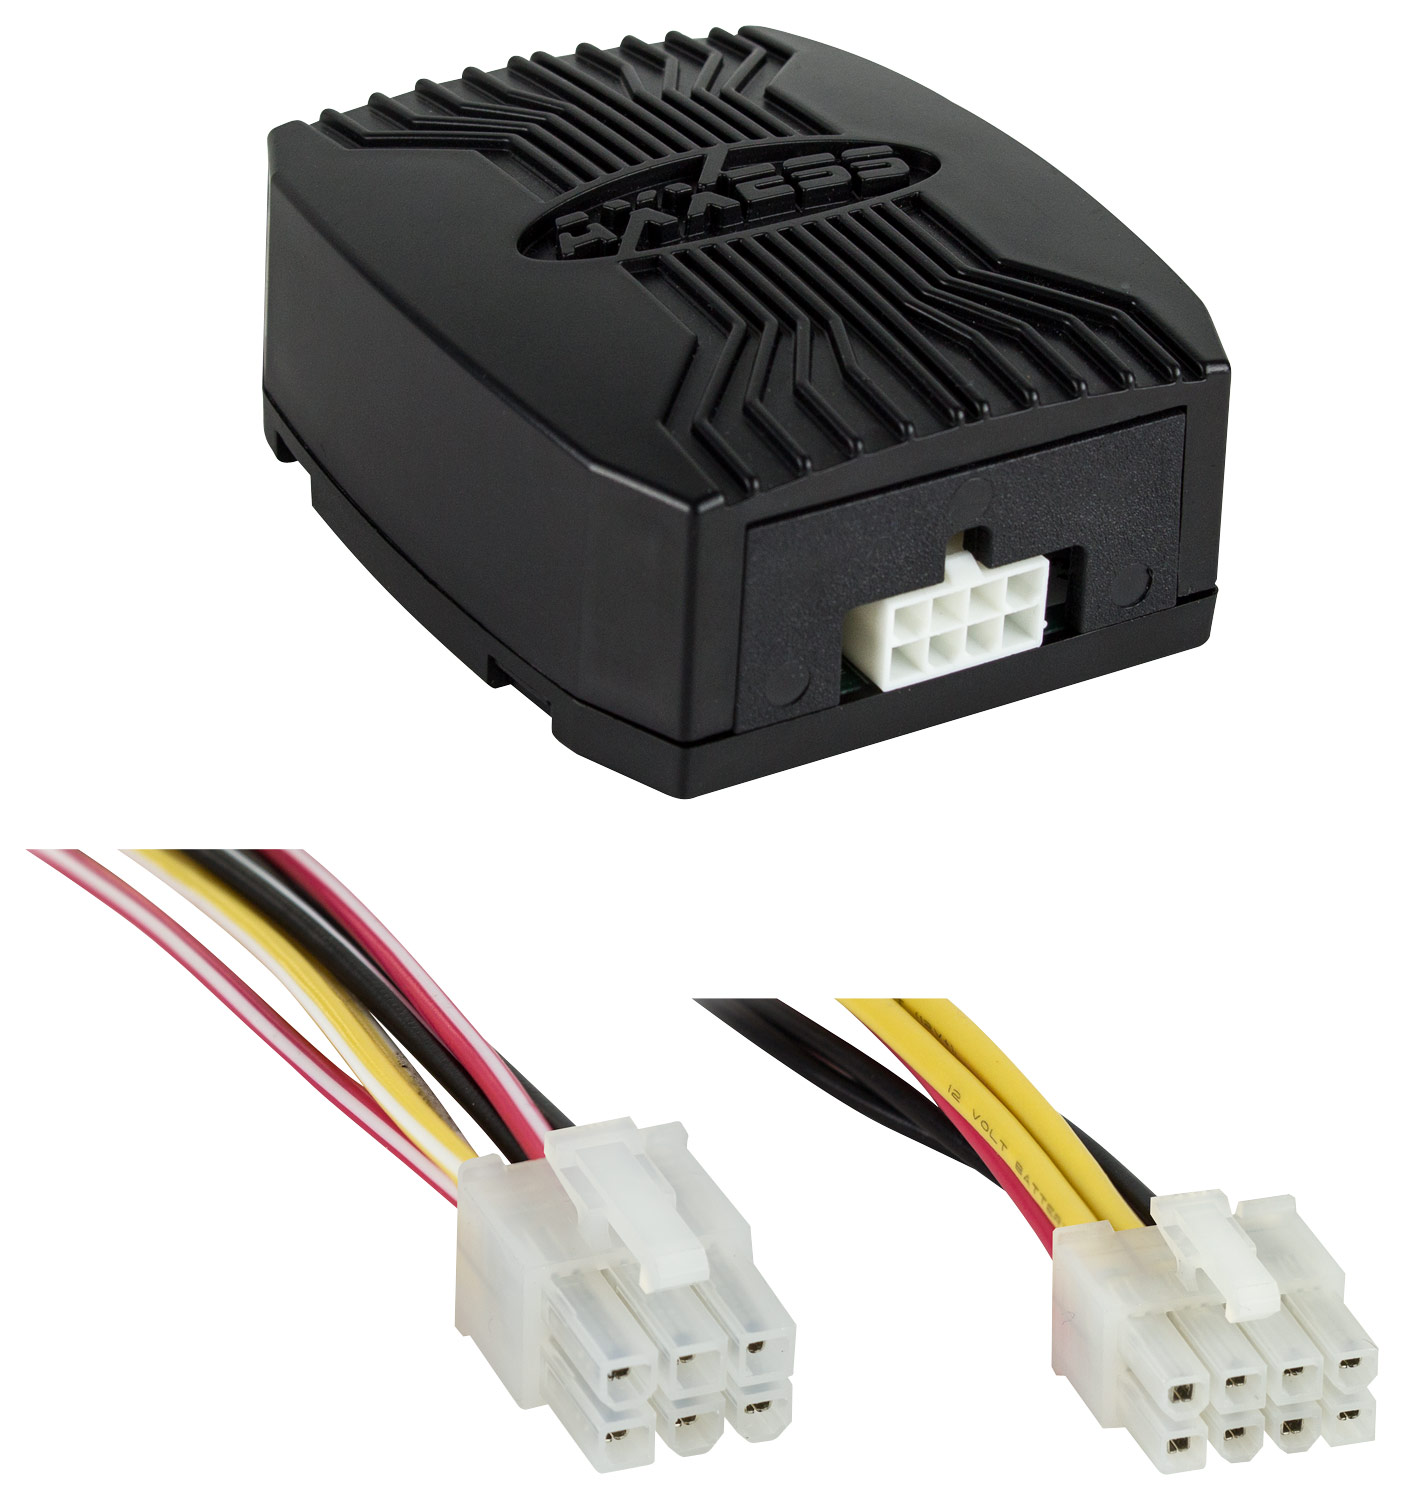 AXXESS - Voltage Retention Interface for Most Vehicles - Multi was $199.99 now $149.99 (25.0% off)